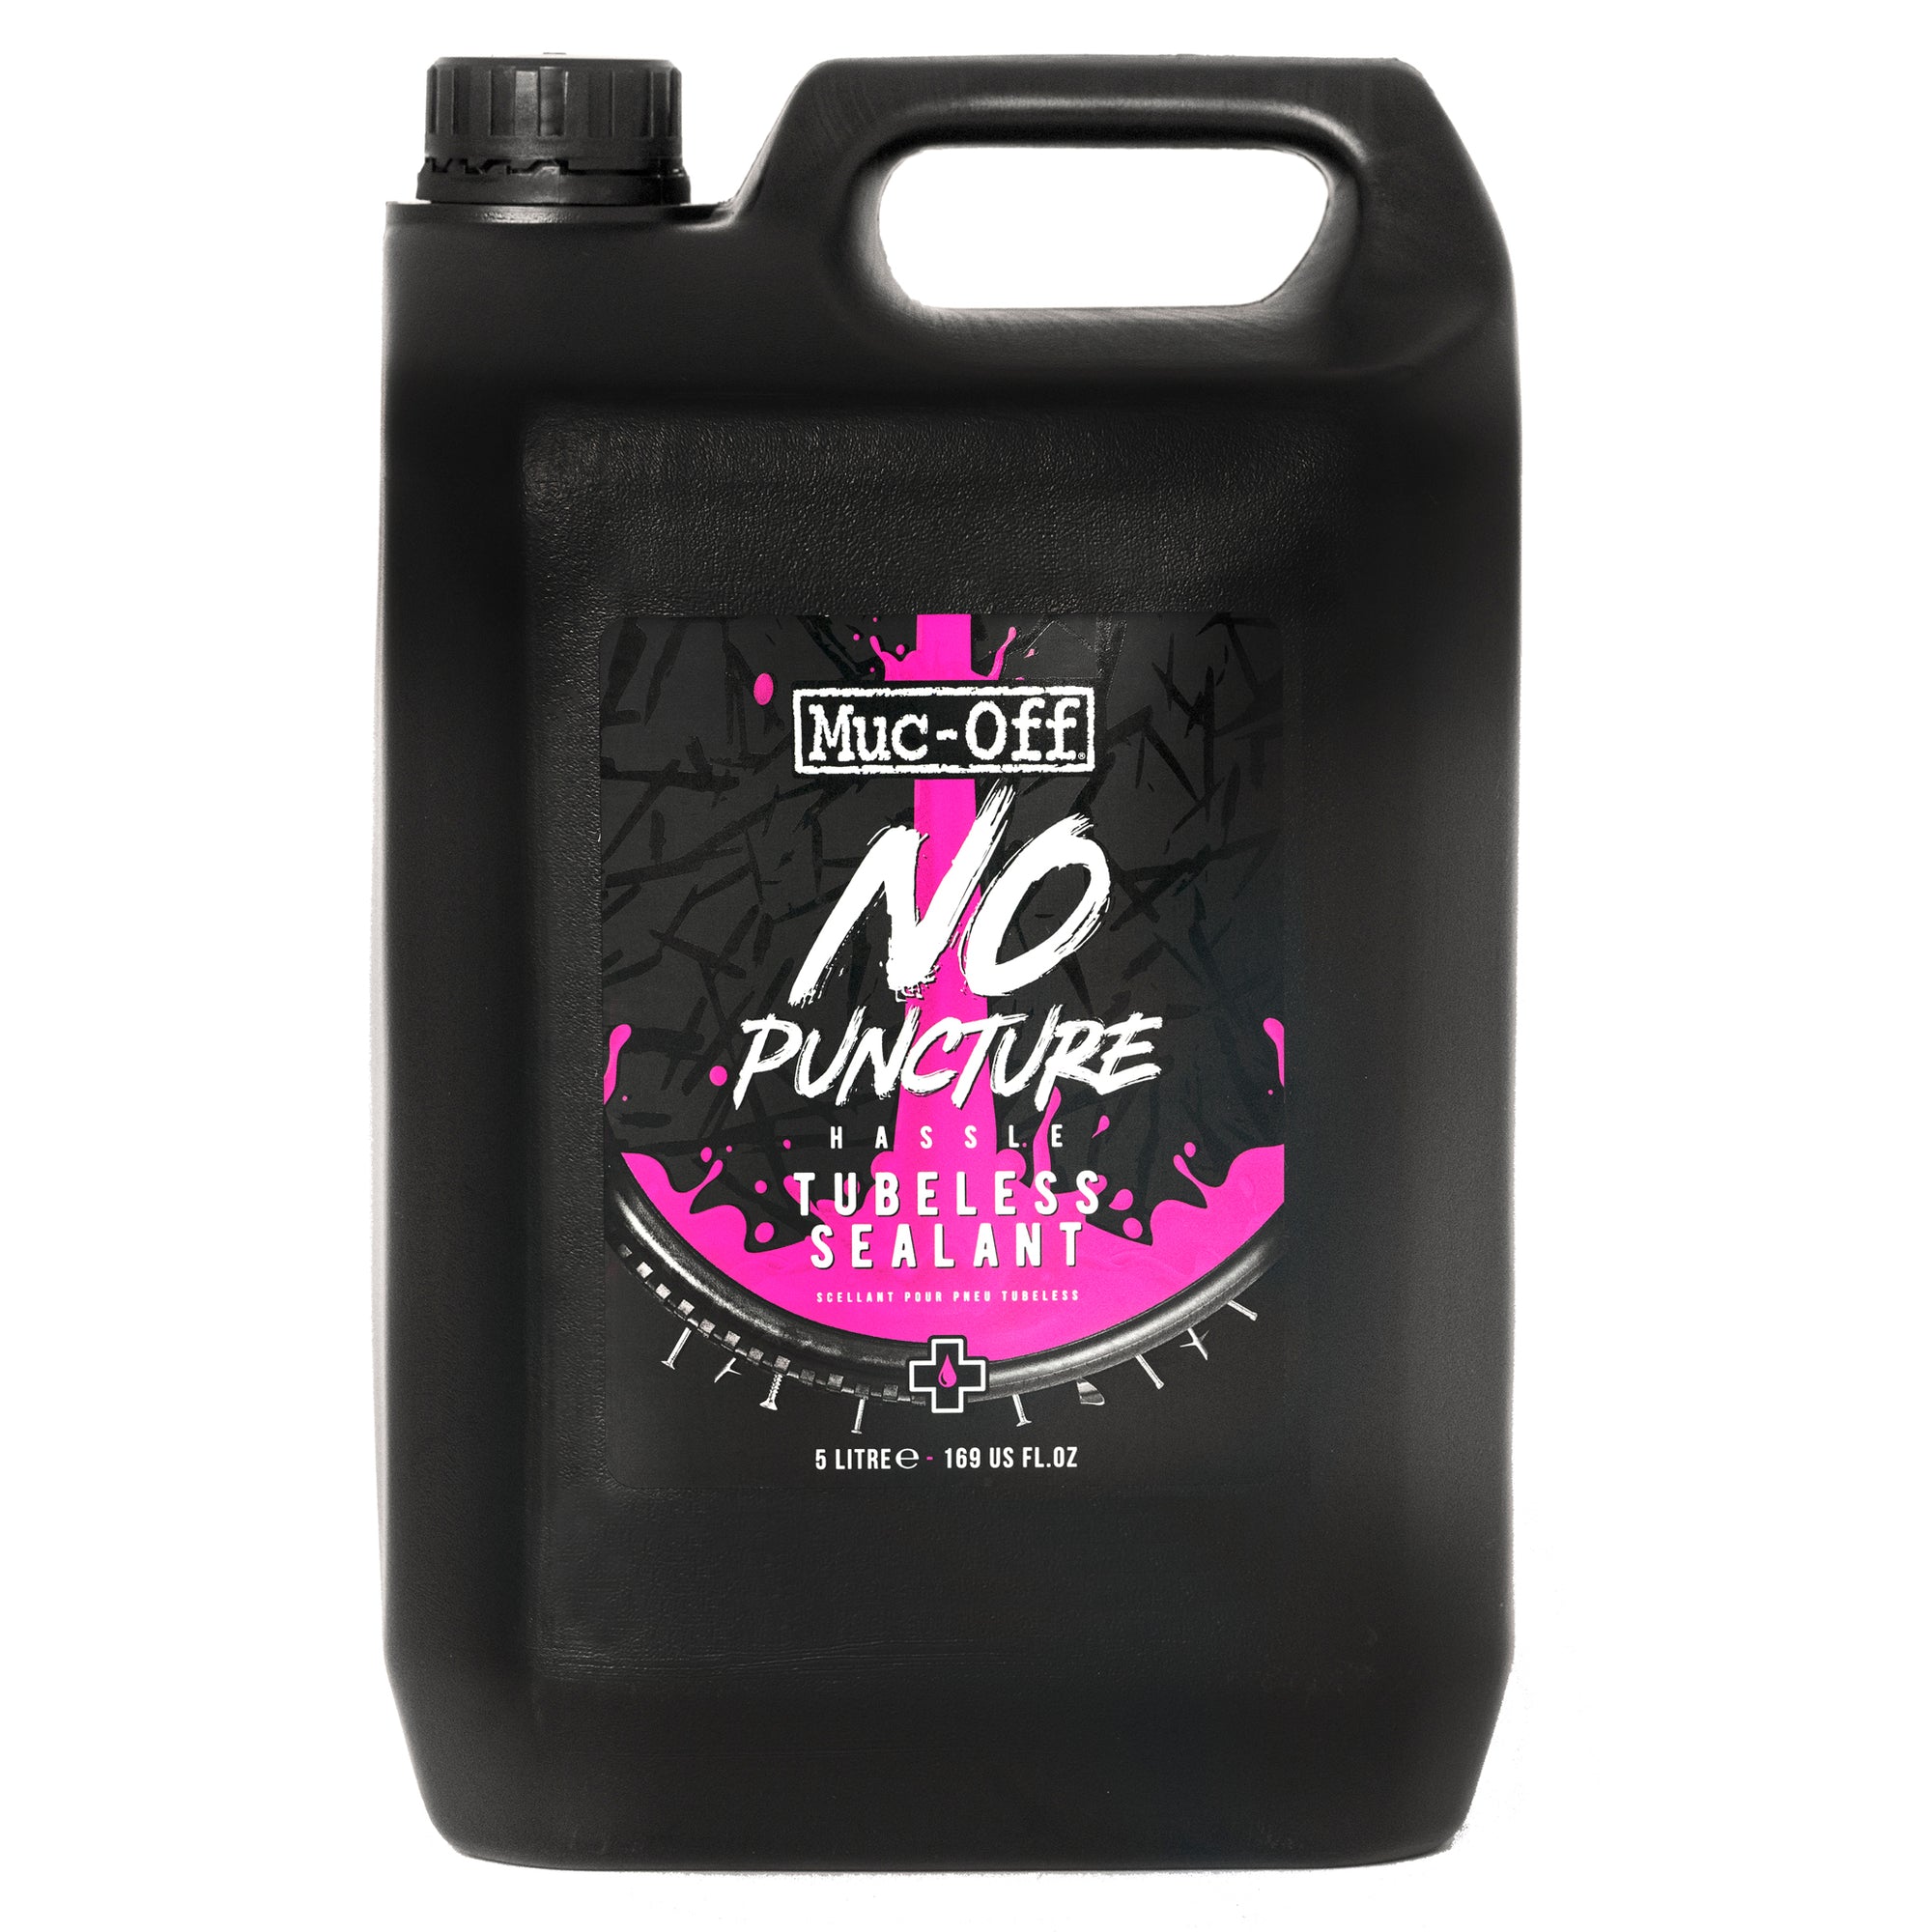 Muc-Off No Puncture Tubeless Sealant - 5L - Downtown Bicycle Works 